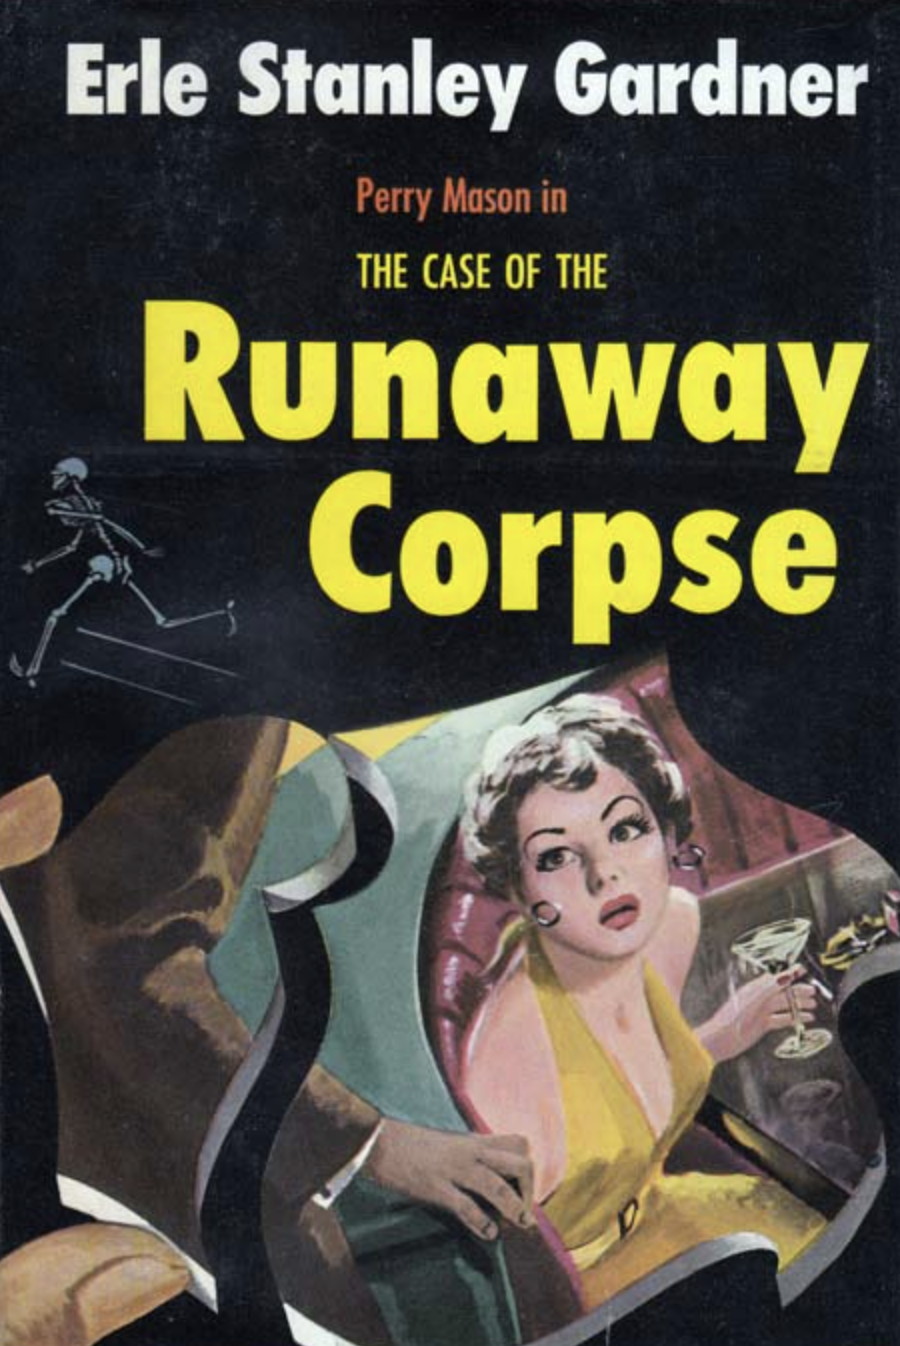 The Case of the Runaway Corpse book cover.